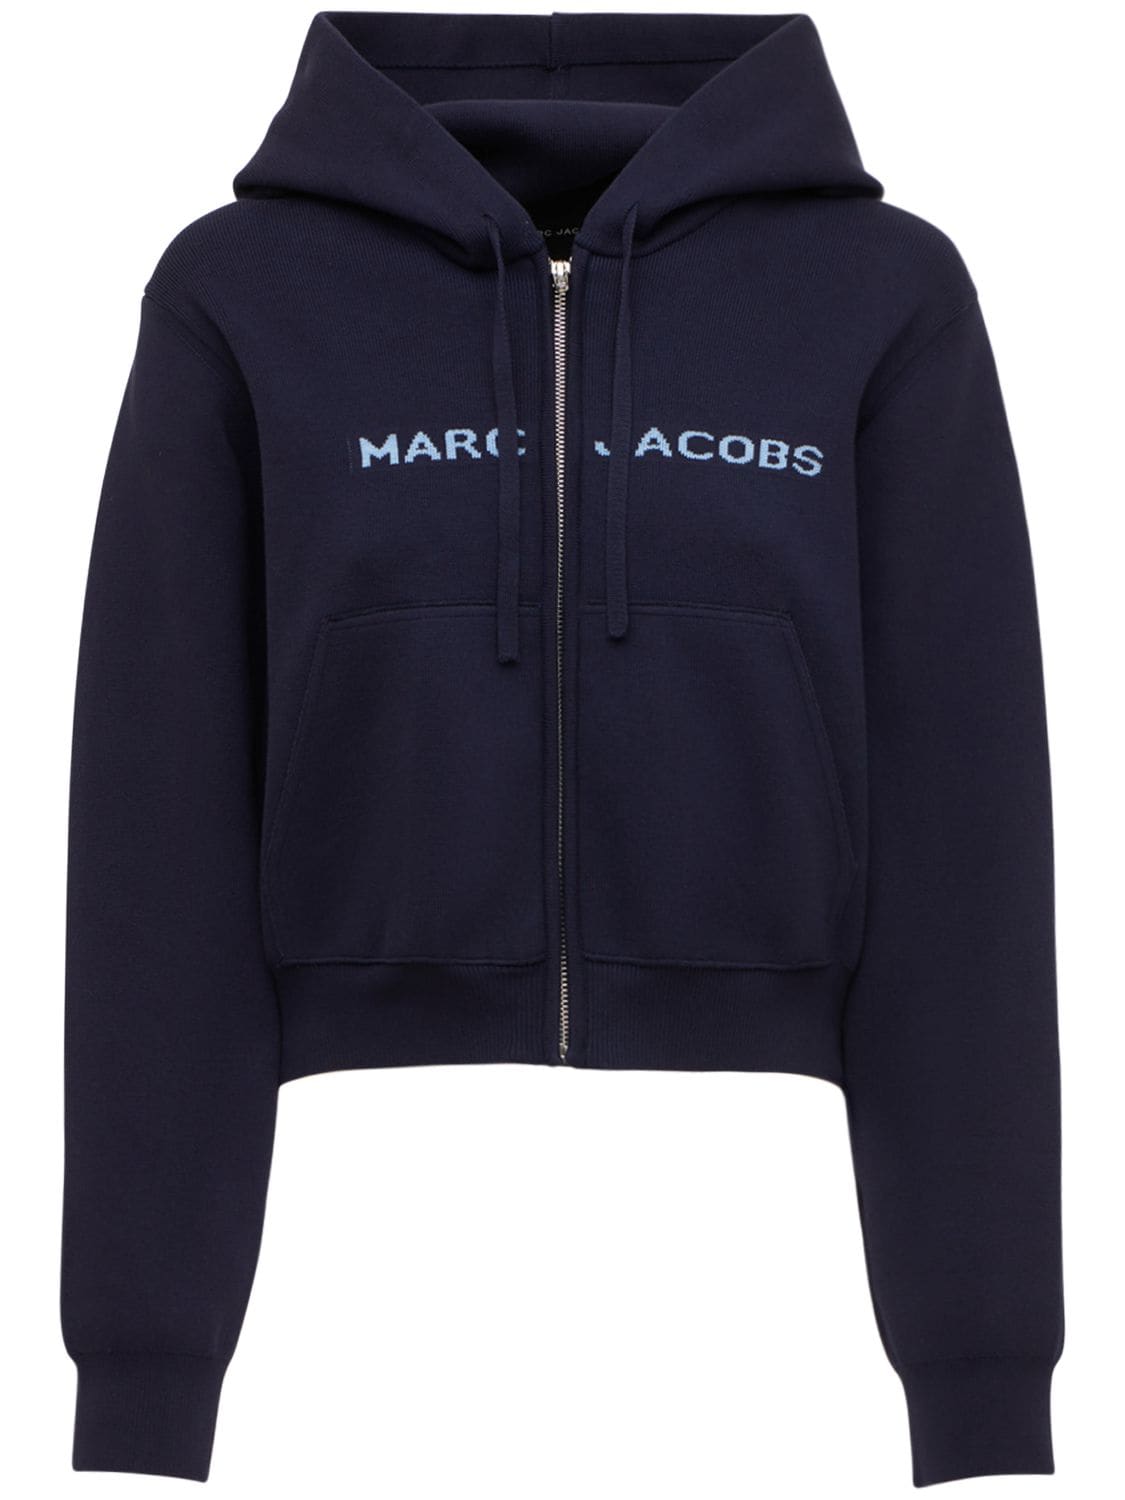 MARC JACOBS (THE) Logo Cropped Cotton Blend Zip Hoodie